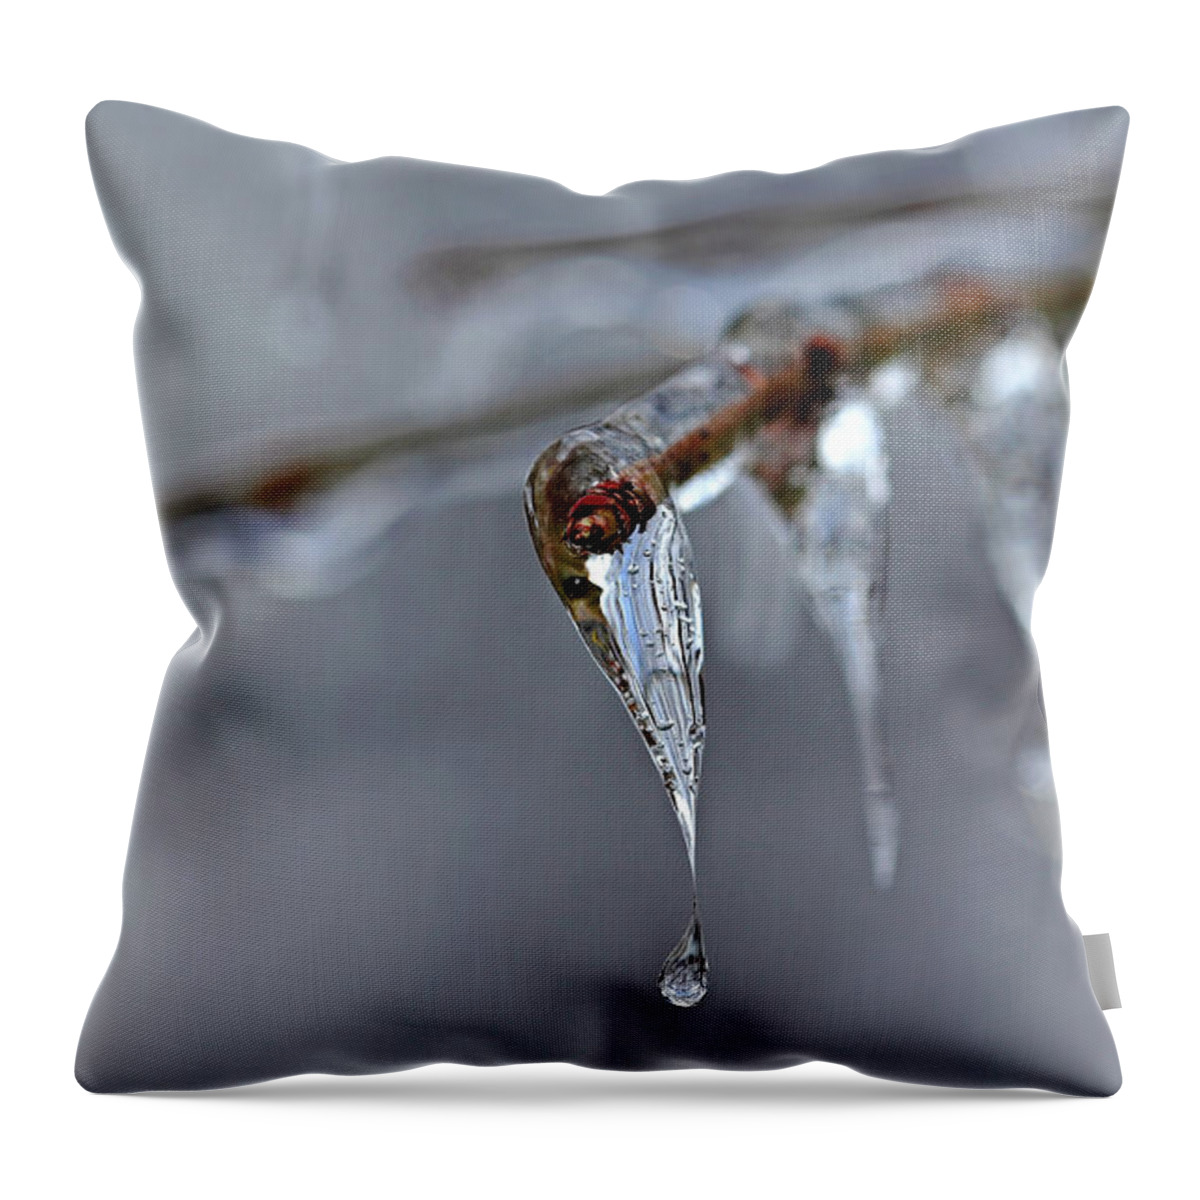 Icicle Throw Pillow featuring the photograph Icicle Teardrop by Debbie Oppermann